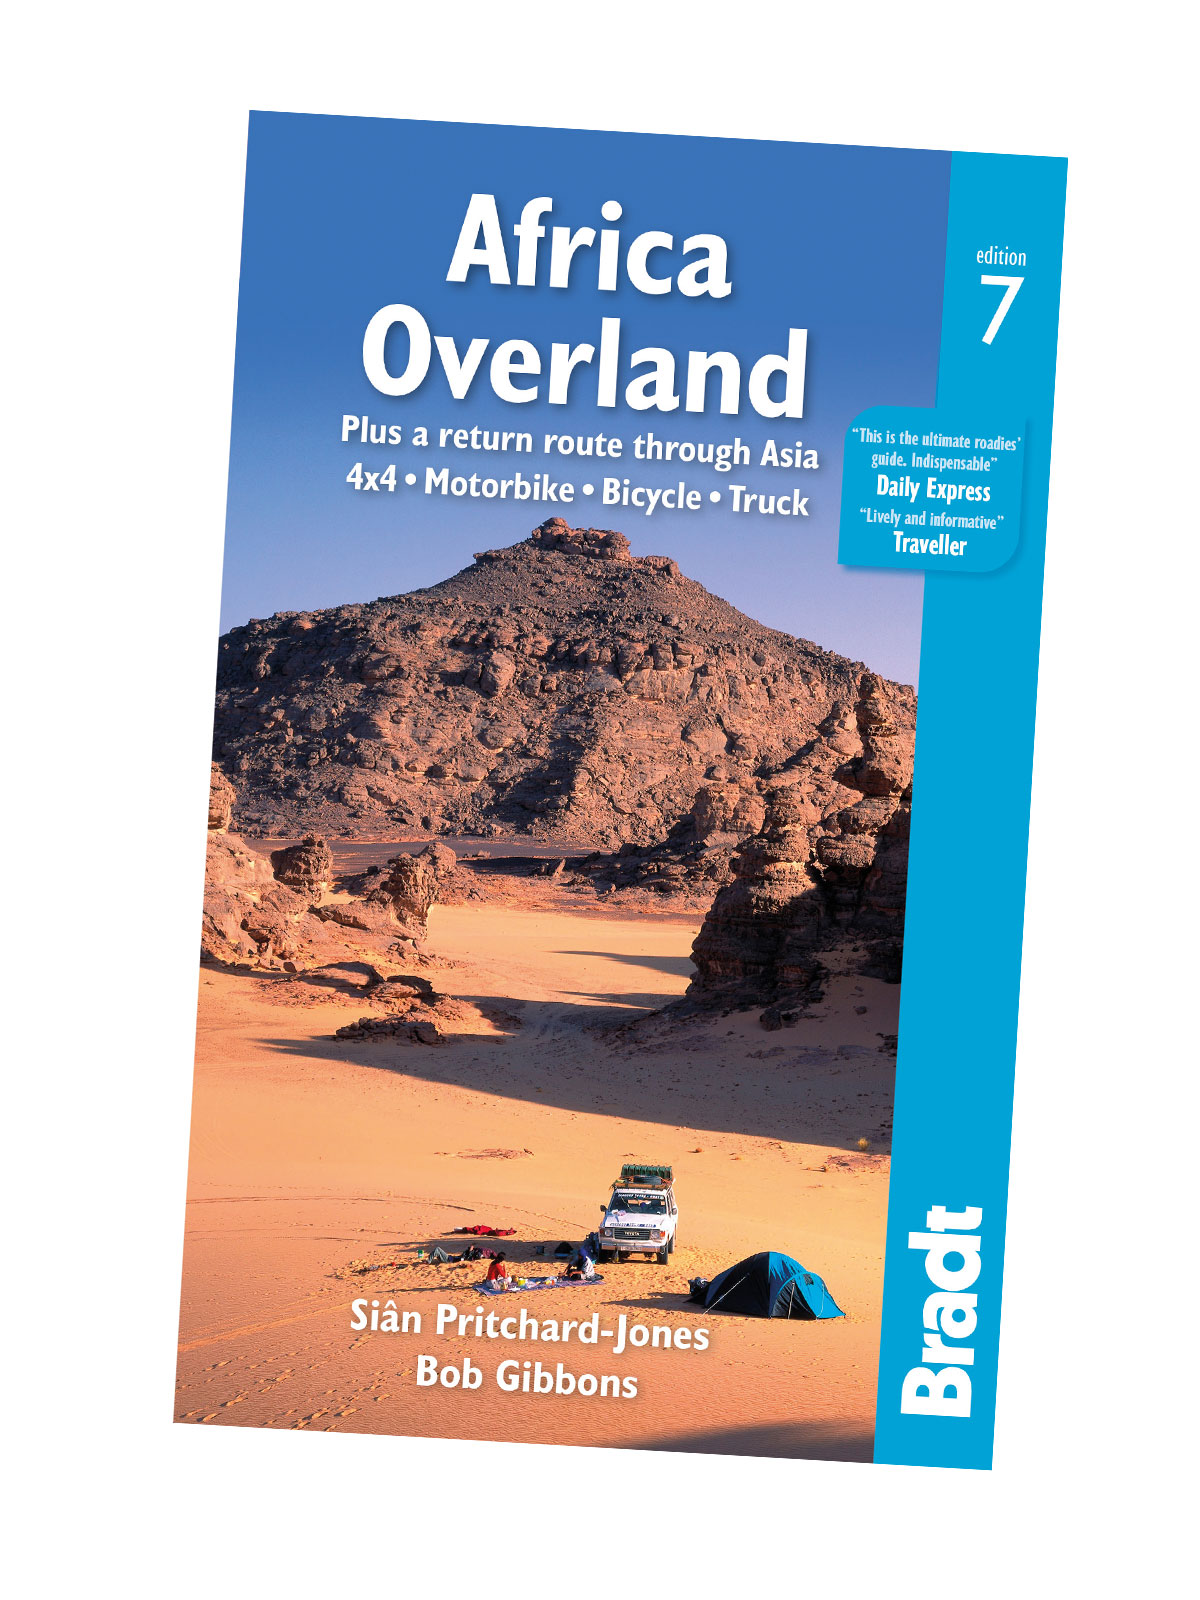 Africa Overland guide